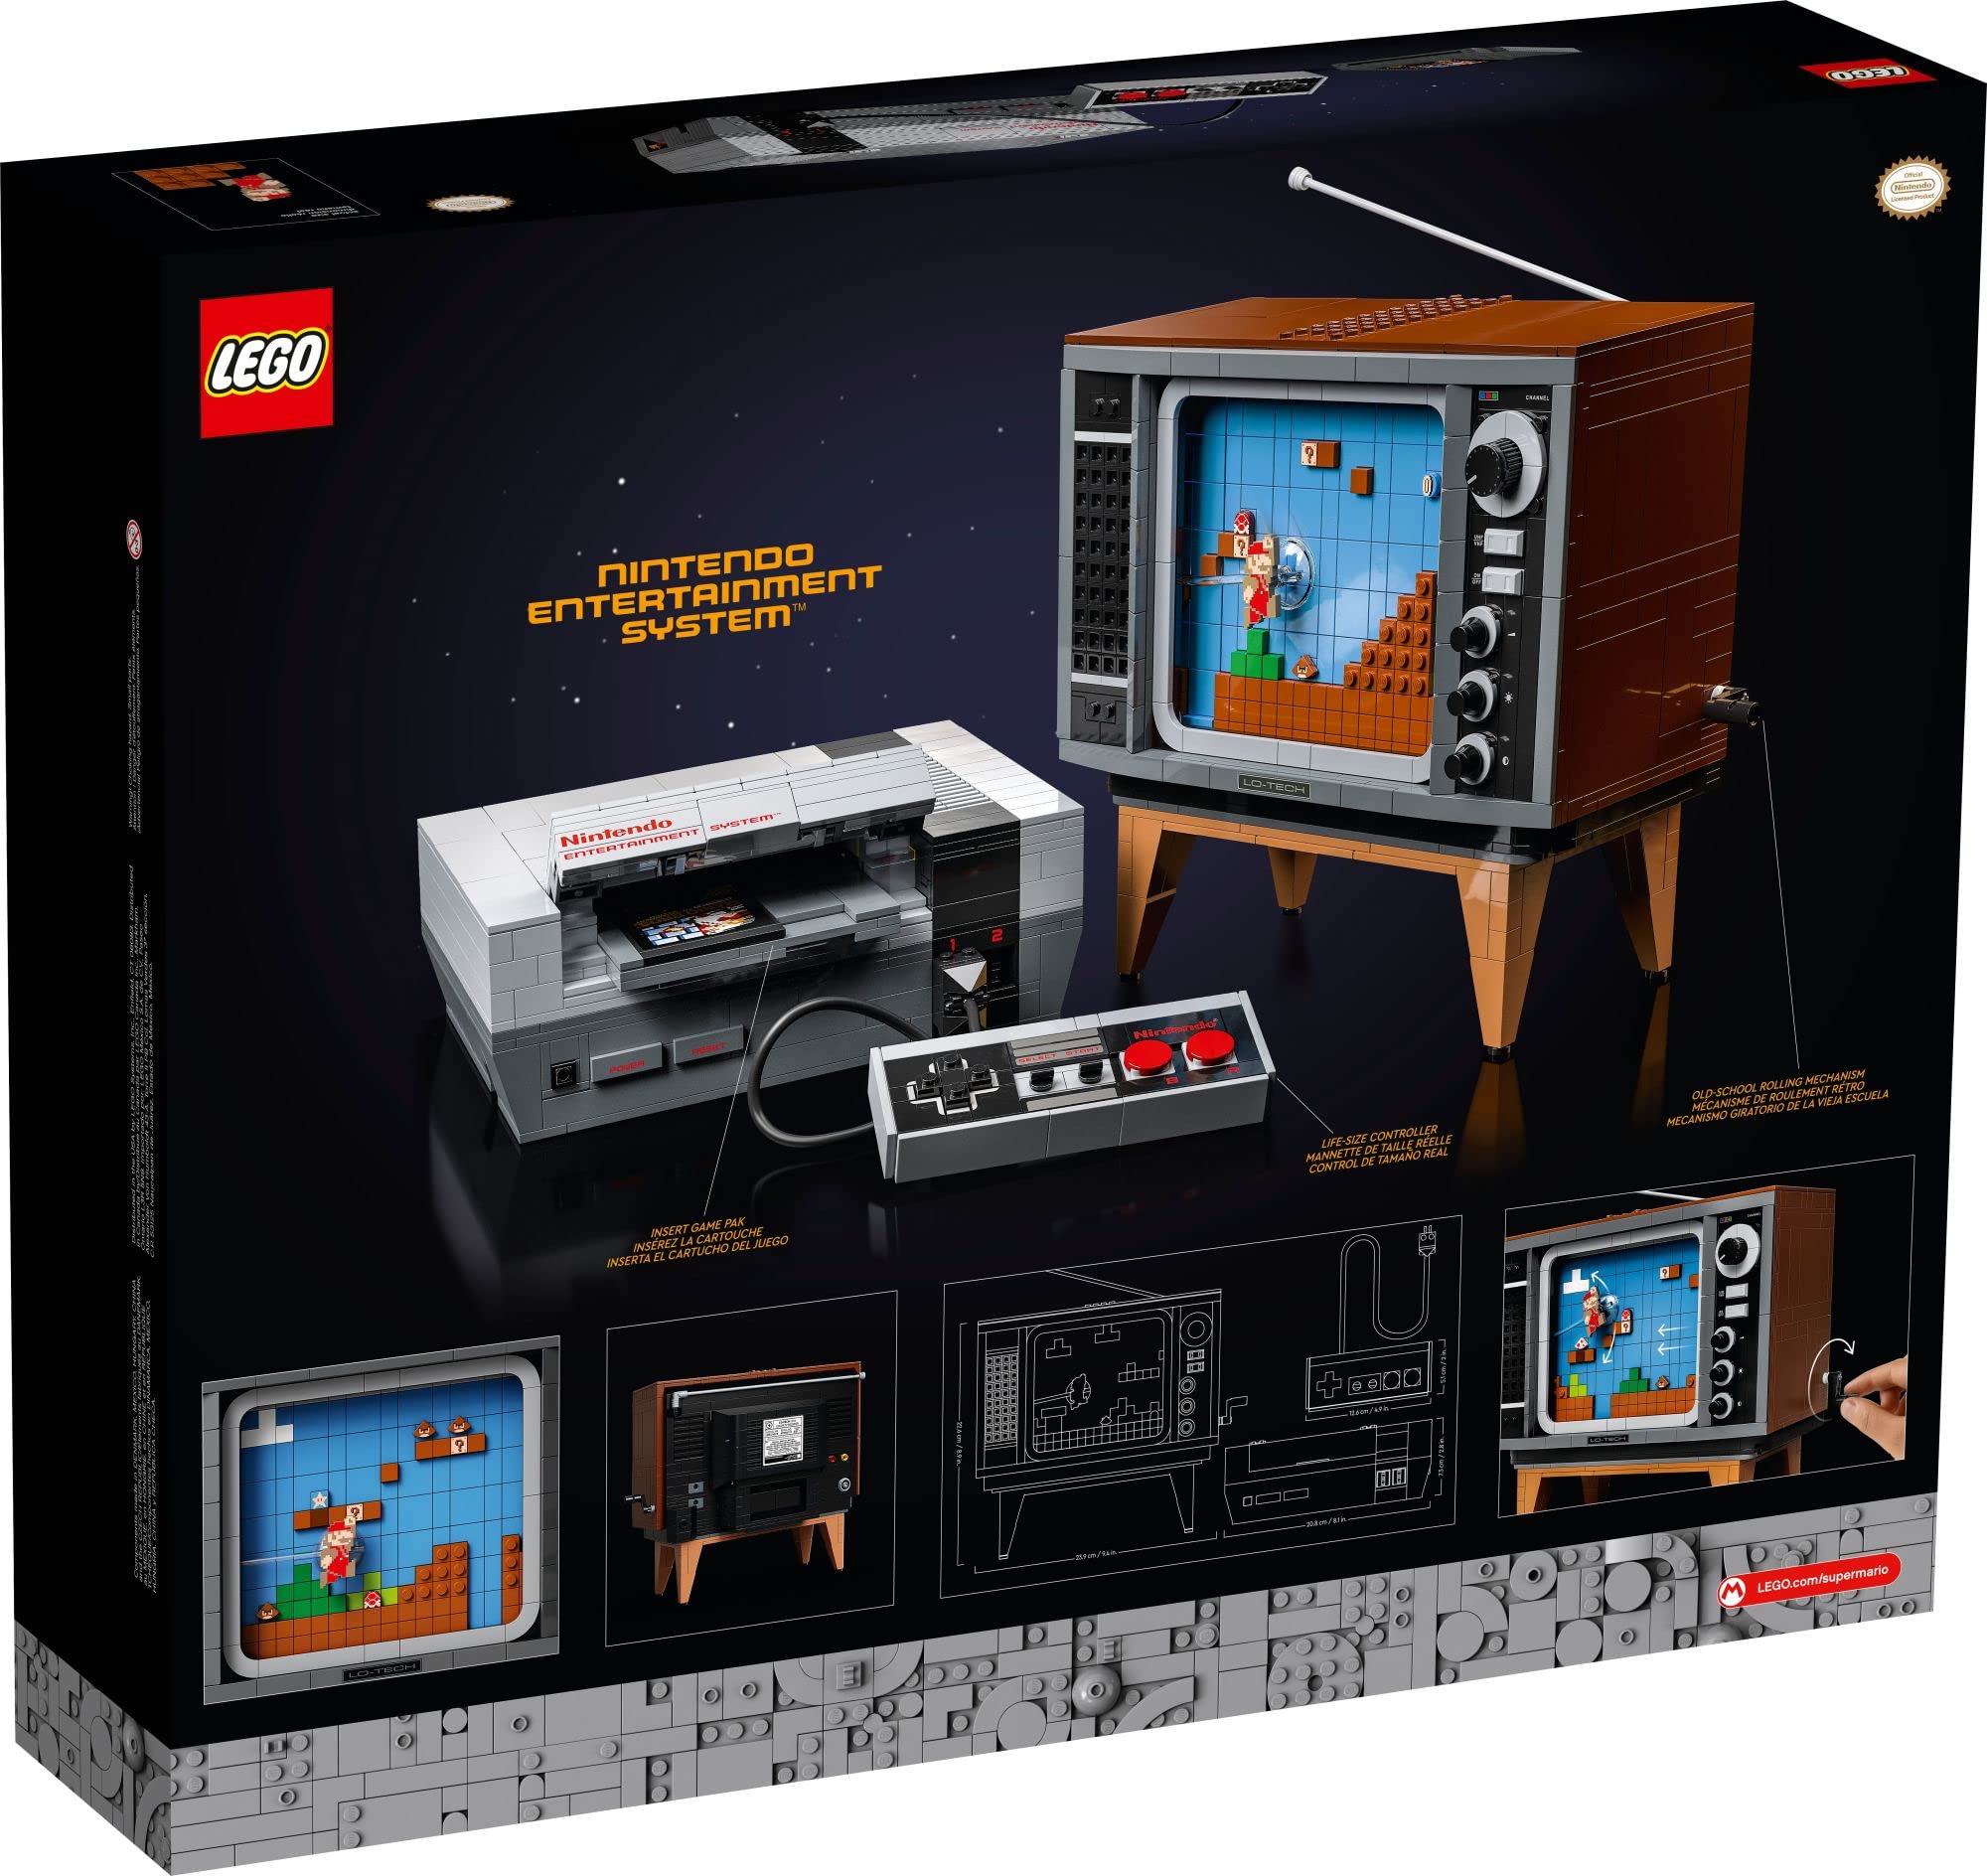 LEGO Super Mario Nintendo Entertainment System 71374 Gameplay Building Set, Model Kits for Adults to Build, DIY Creative Activity, Collectible Gift Idea